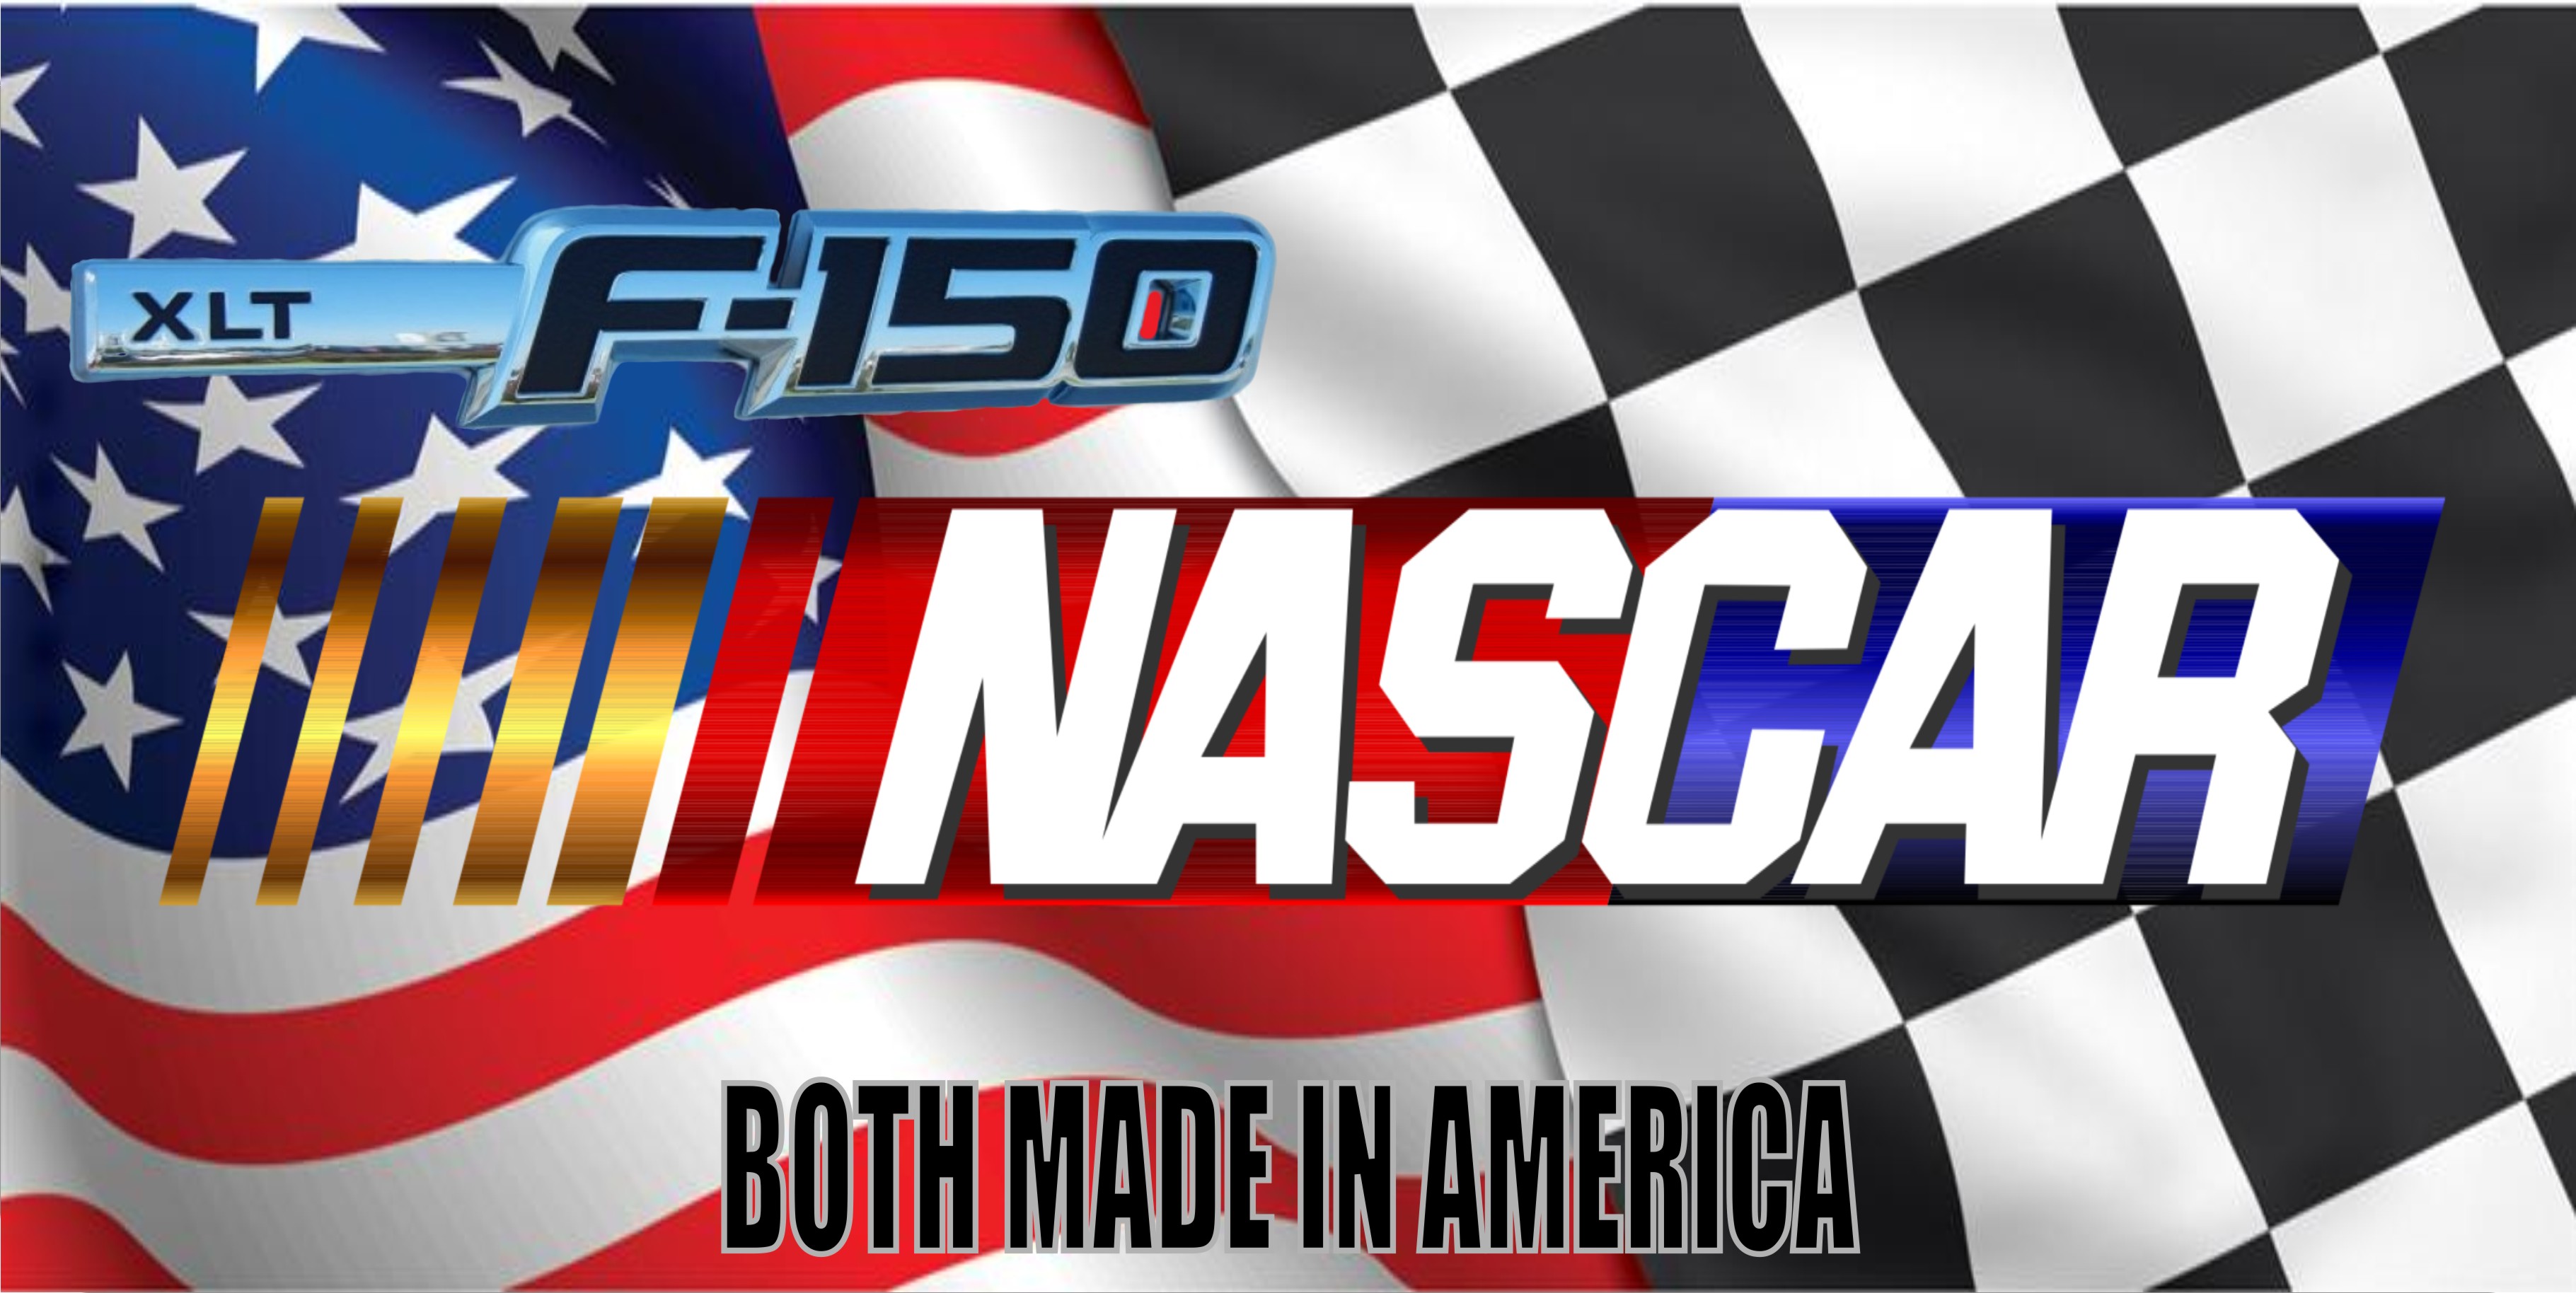 Nascar And Ford F-150 Checkered Flag Photo License Plate